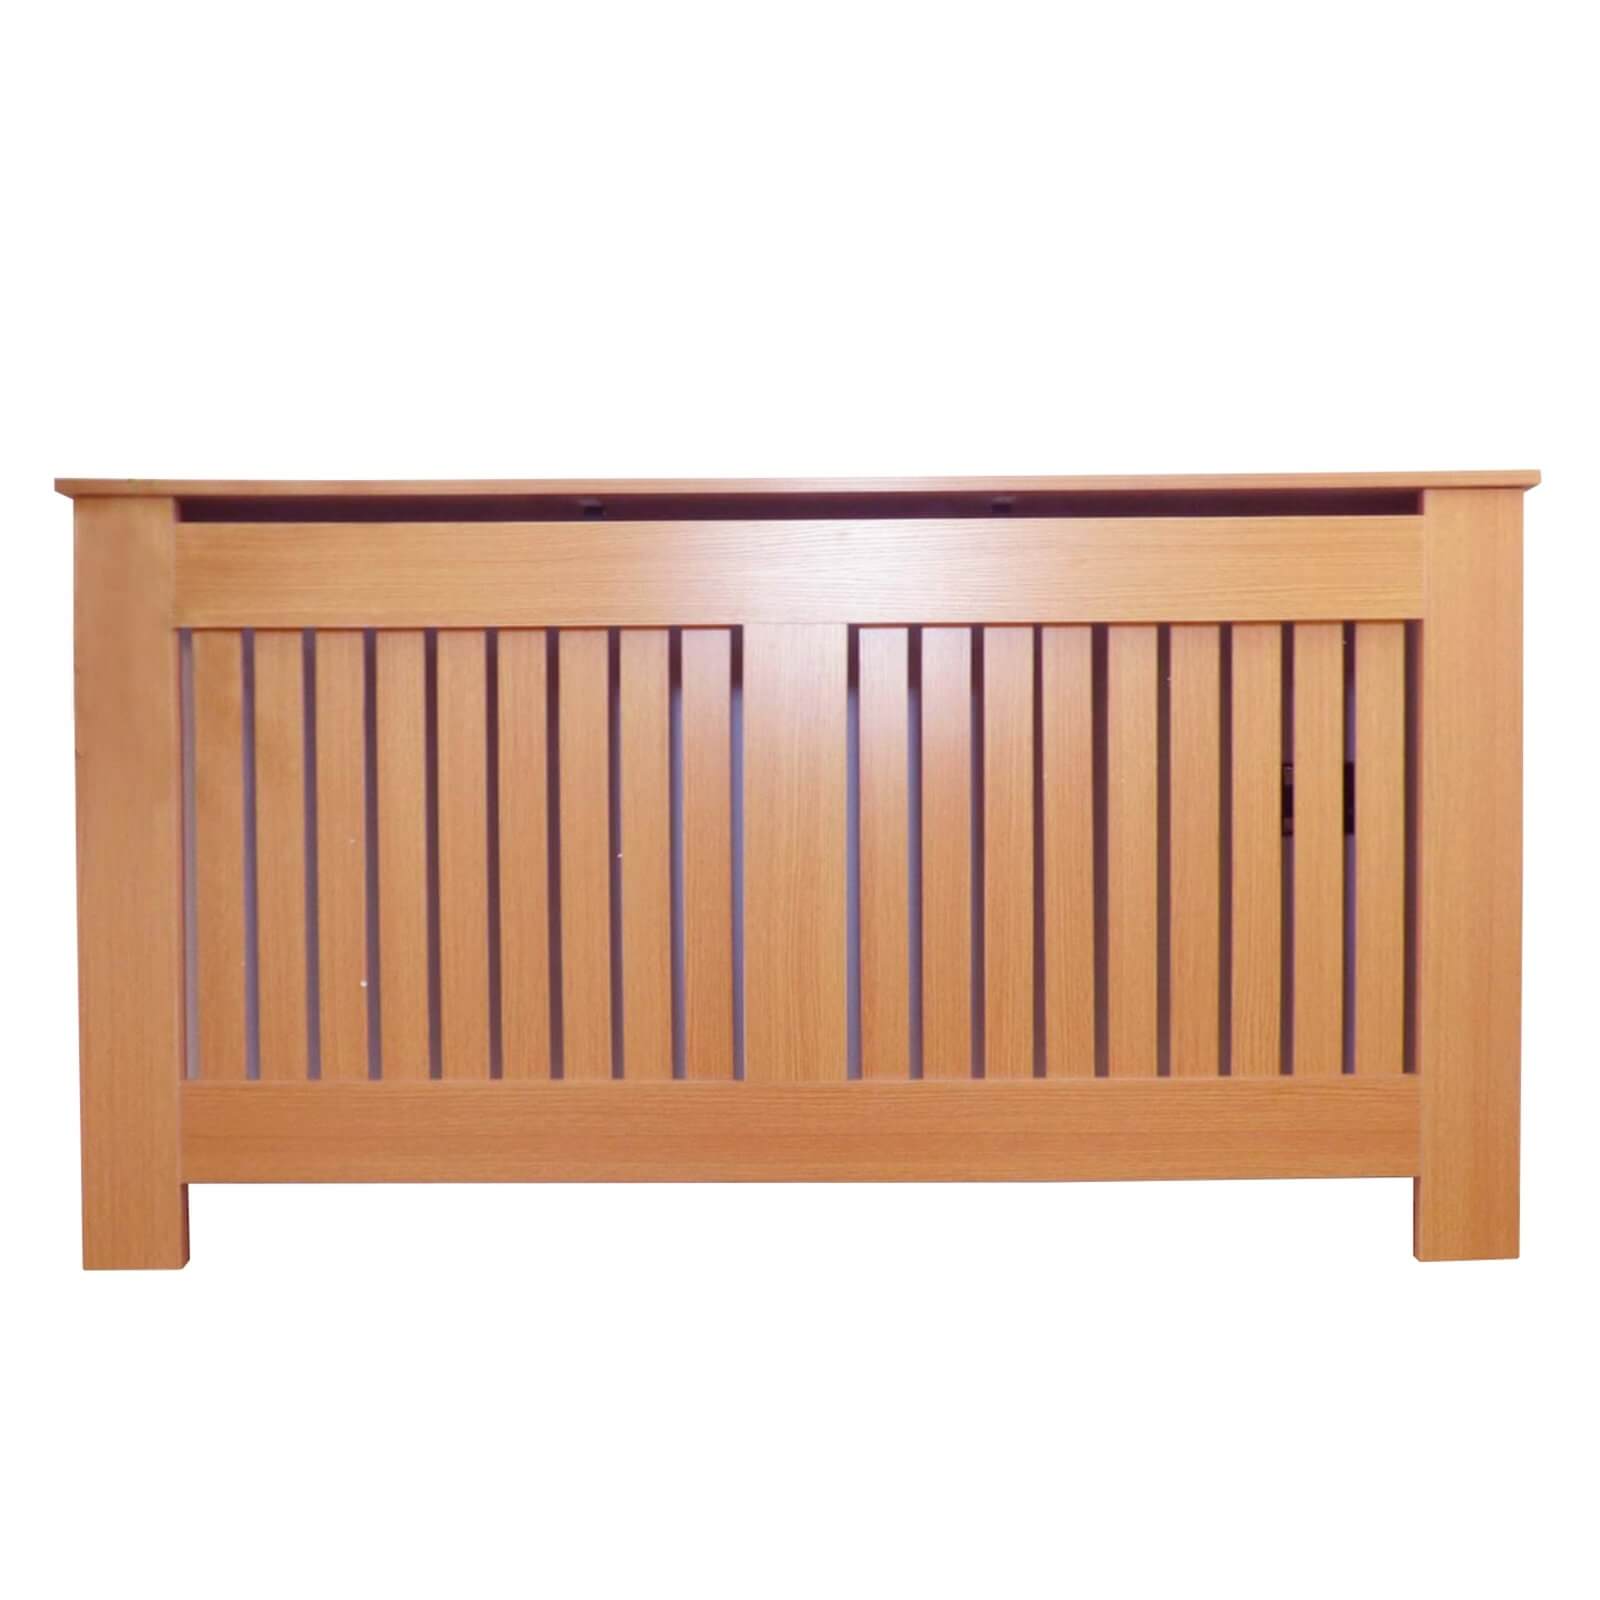 Oak Radiator Cover with Vertical Design - Large